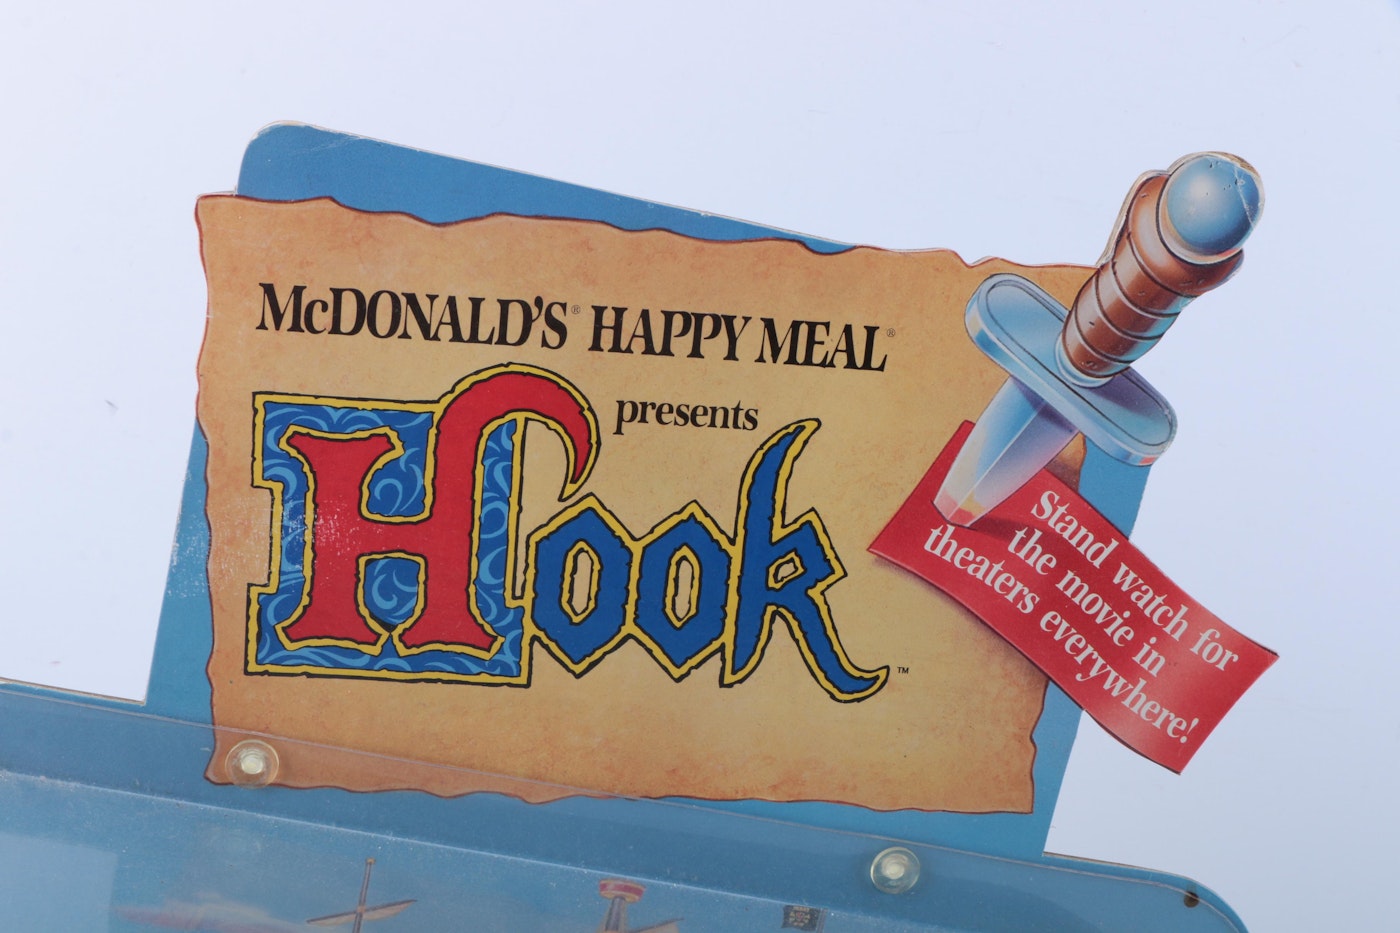 McDonald's Happy Meal Hook Movie Tub Toys Collectibles in